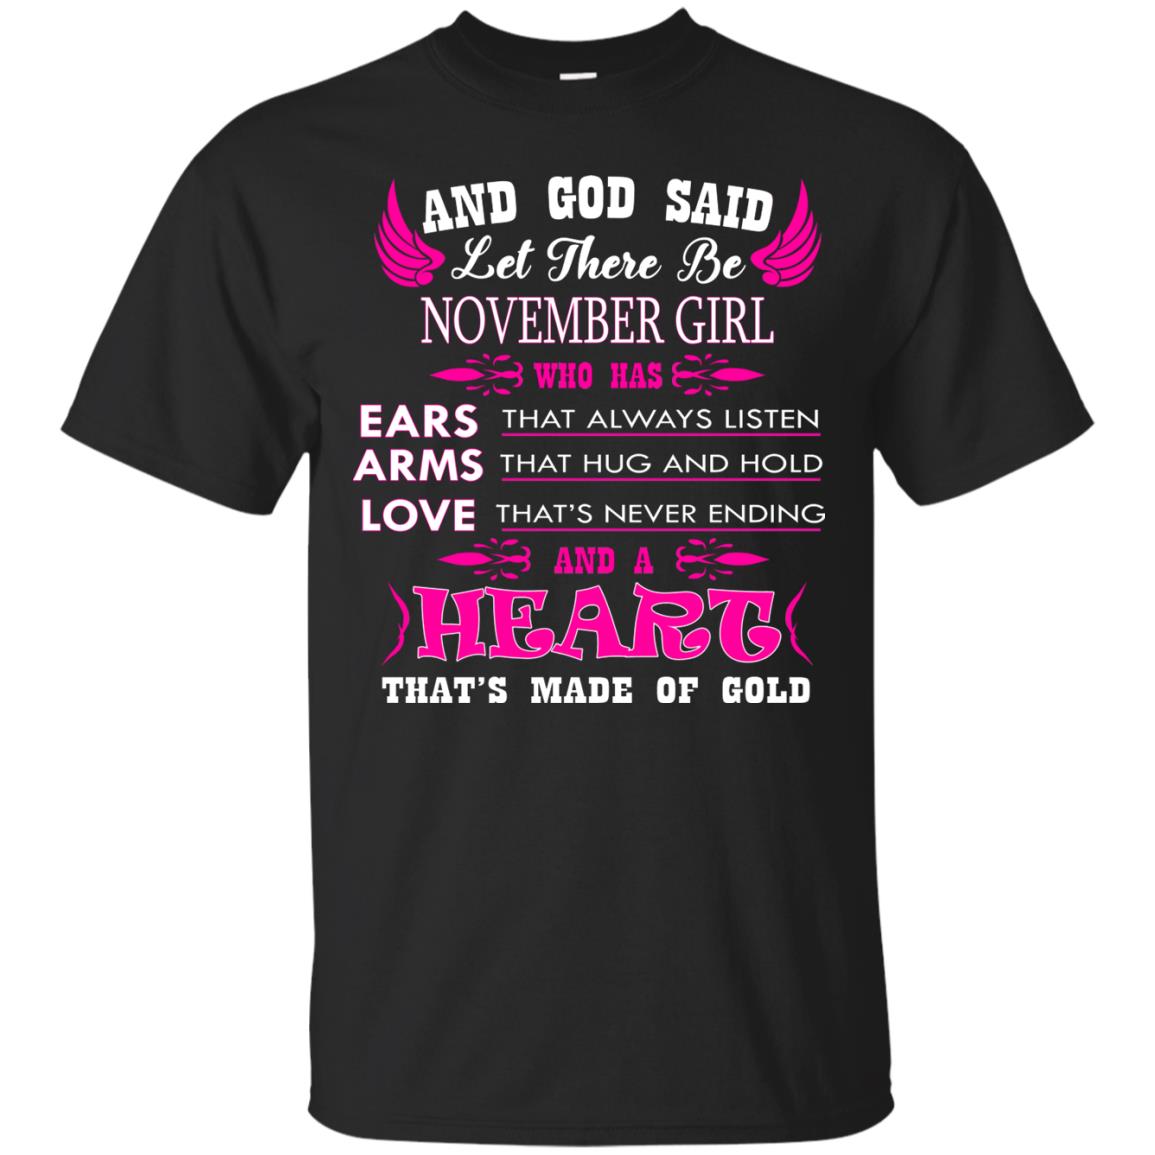 And God Said Let There Be November Girl Who Has Ears - Arms - Love Shirt